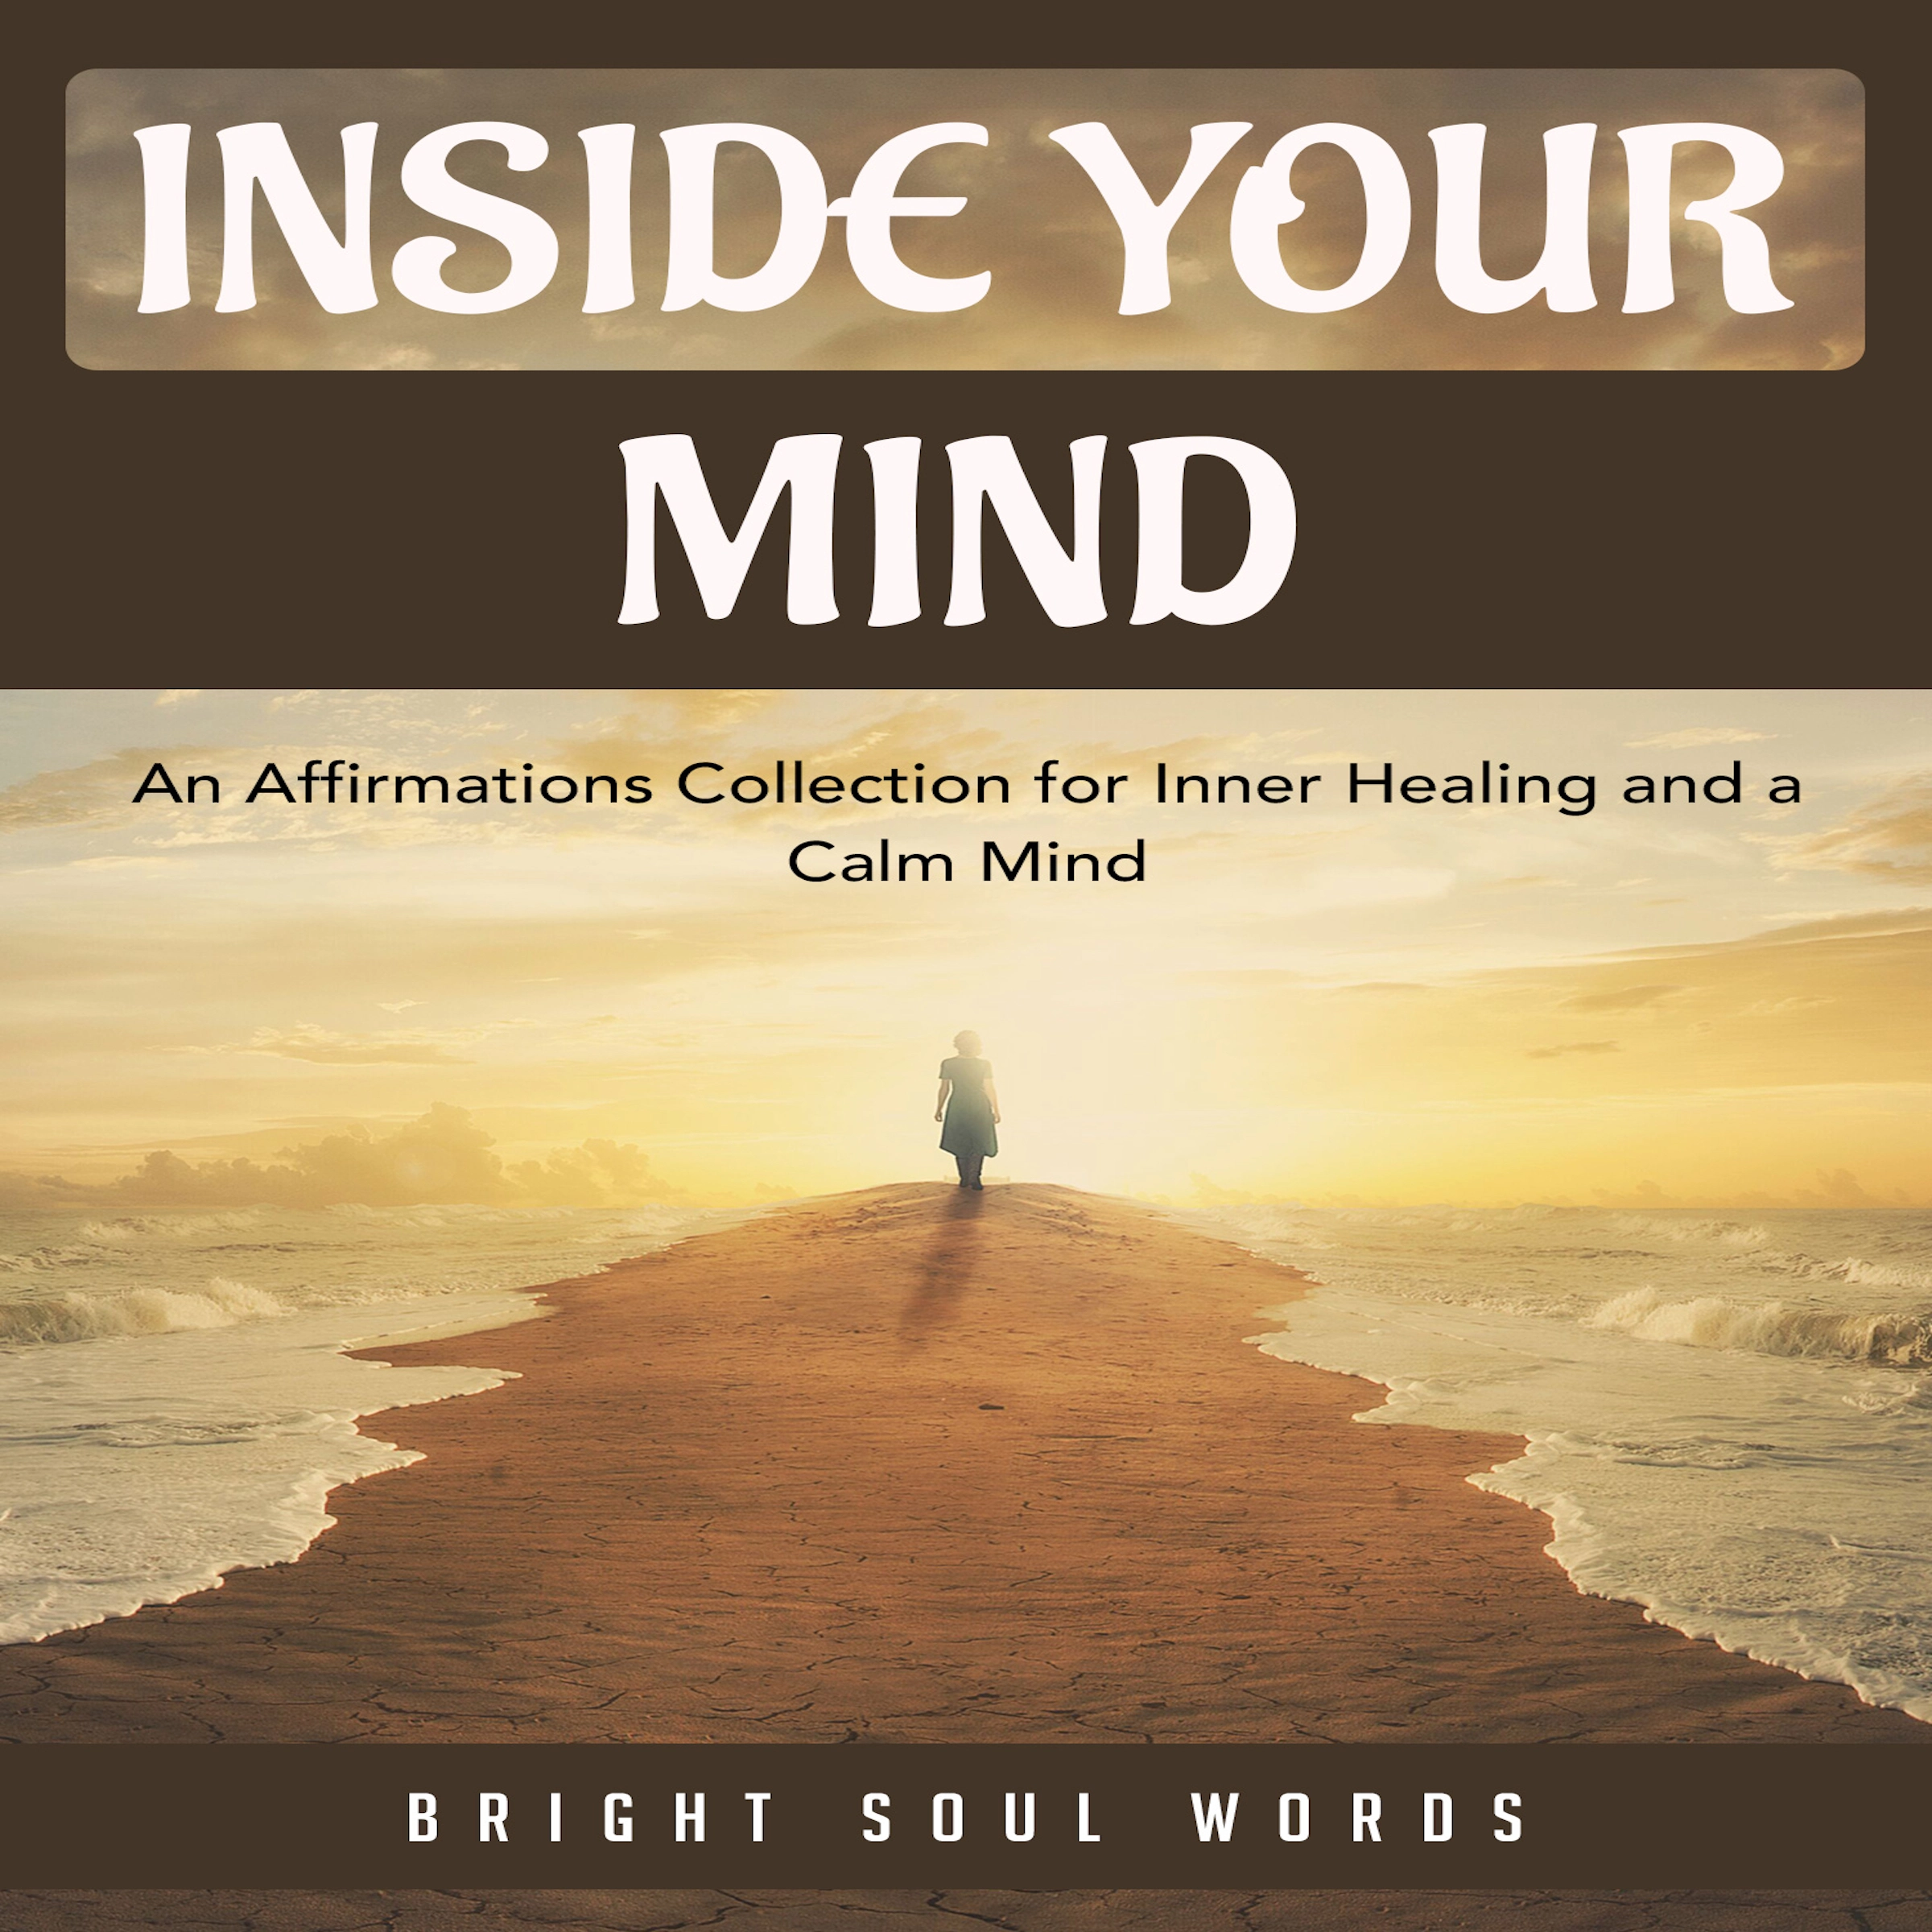 Inside Your Mind: An Affirmations Collection for Inner Healing and a Calm Mind Audiobook by Bright Soul Words